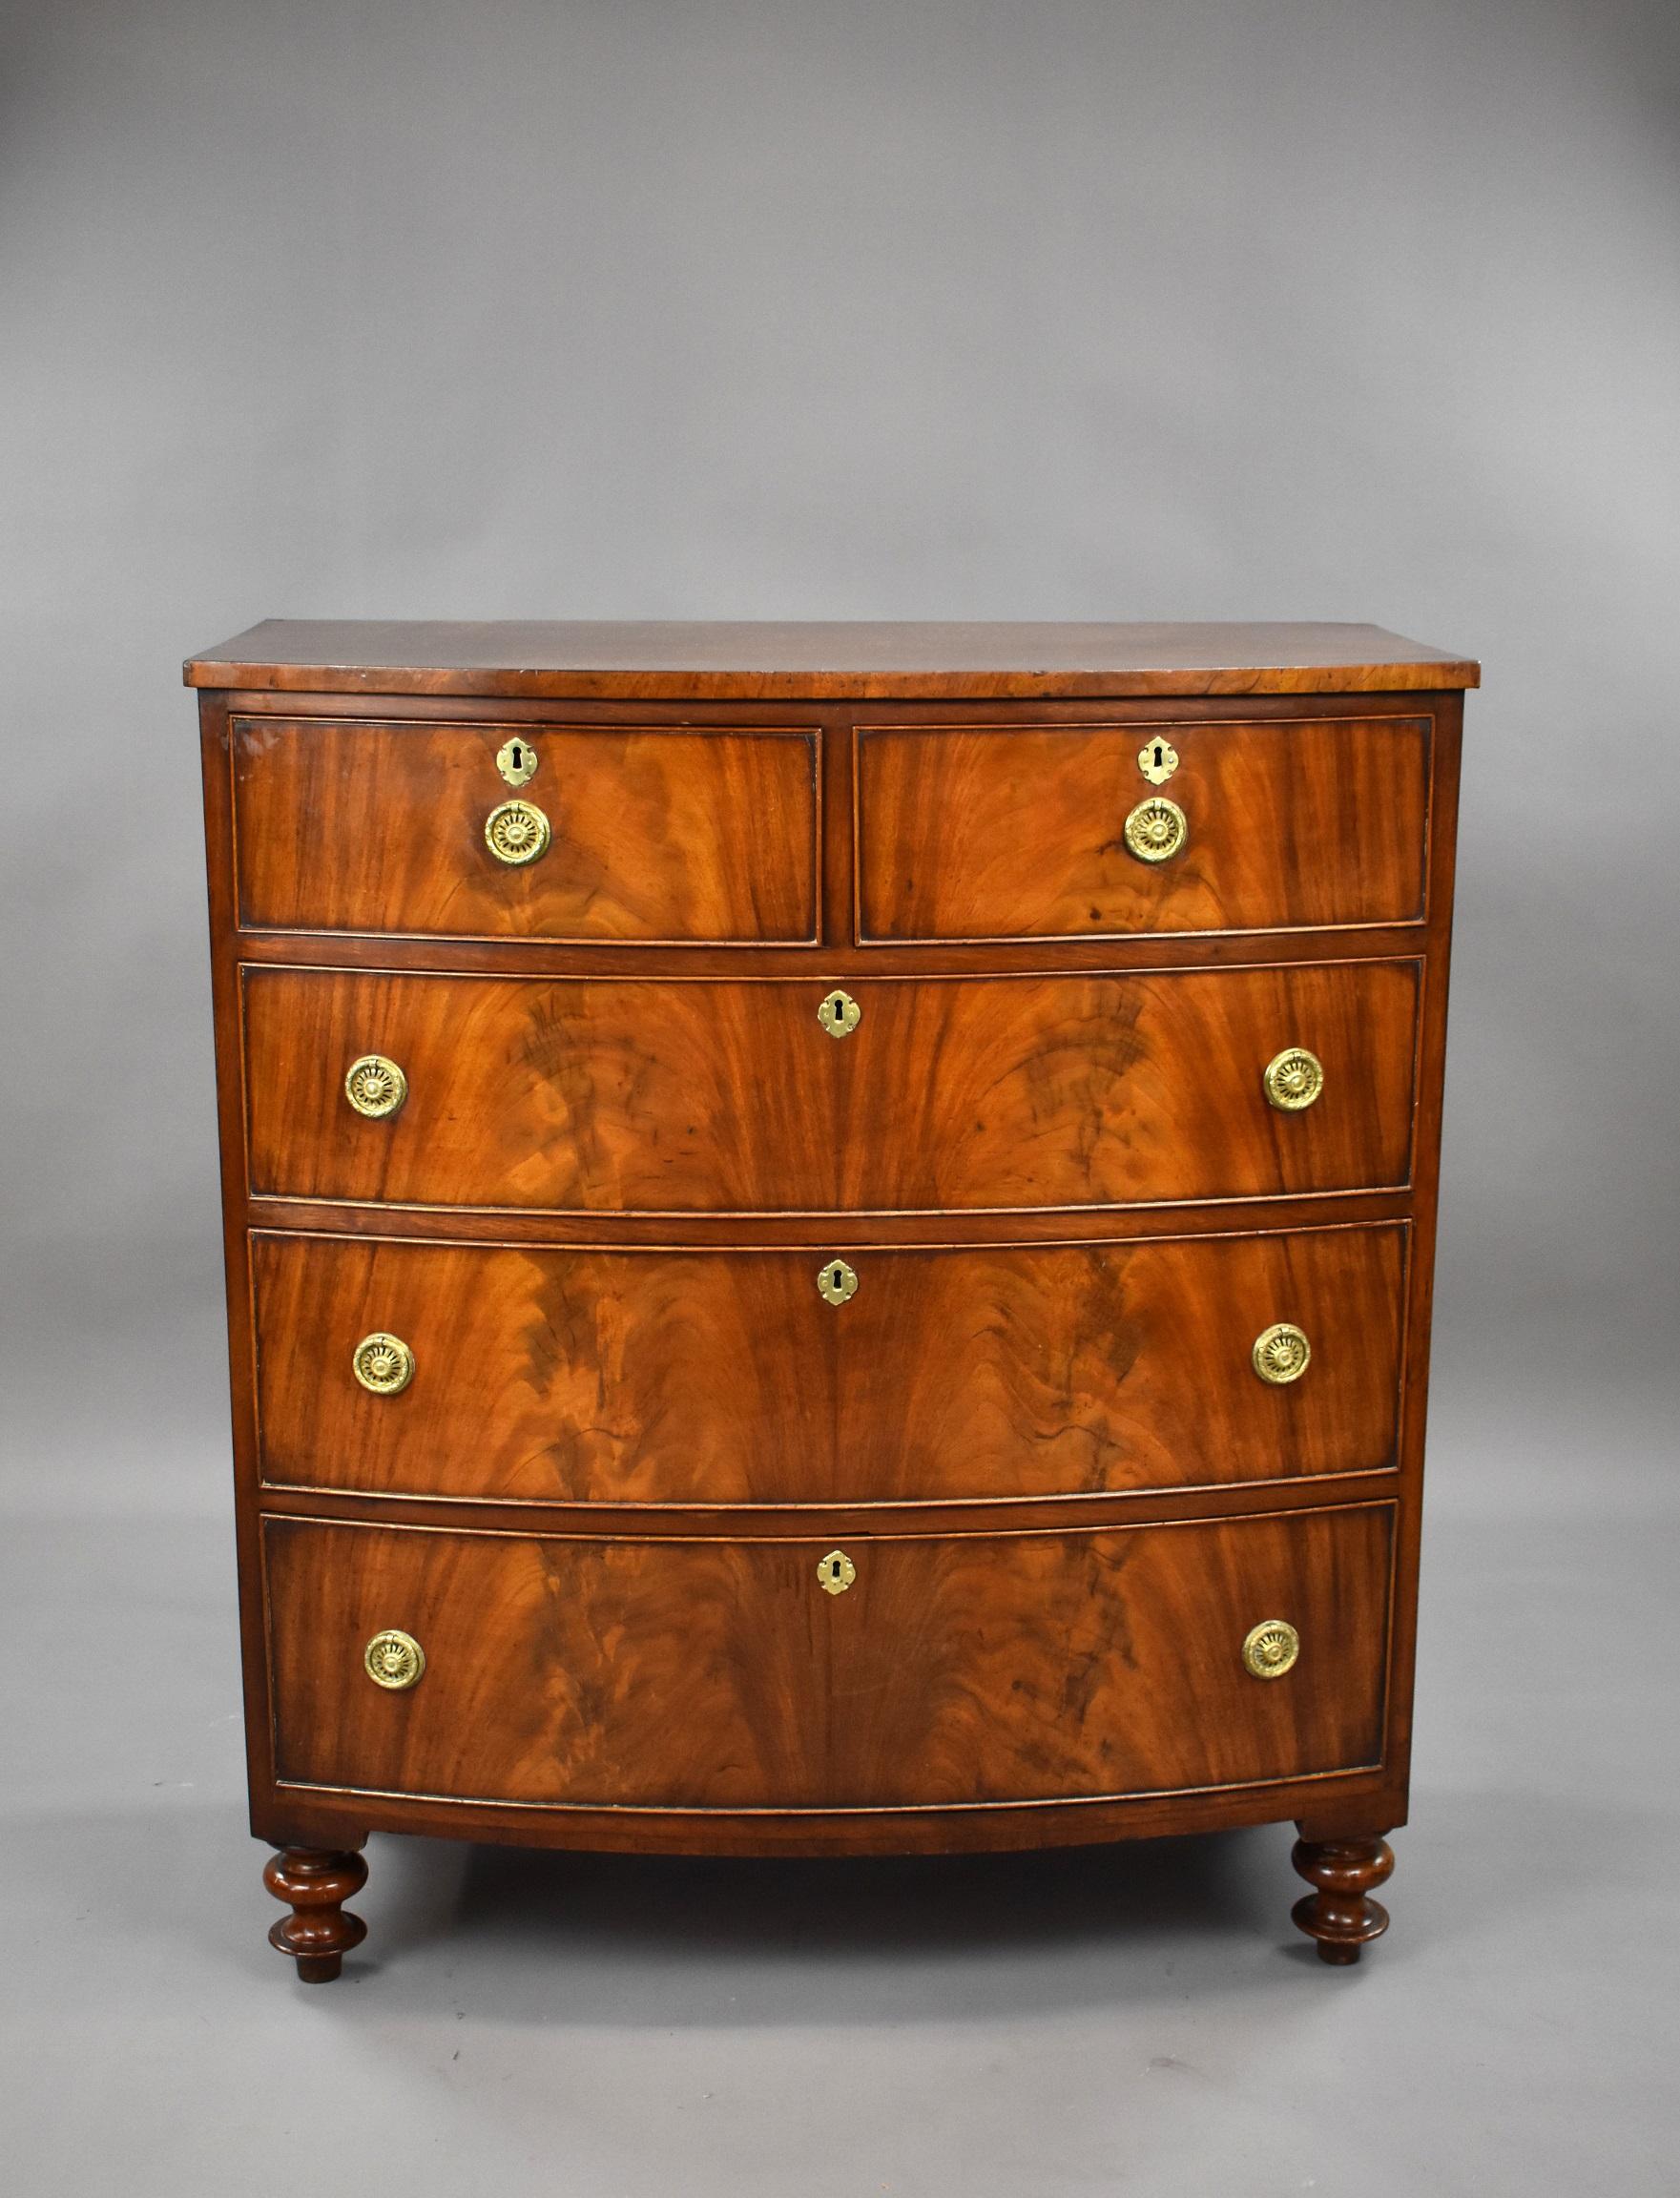 For sale is a Victorian mahogany bow front chest, having an arrangement of five drawers, raised on turned feet. The chest is in very good condition, showing minor signs of wear commensurate with age and use.

Measures: Width: 104cm, Depth: 52cm,